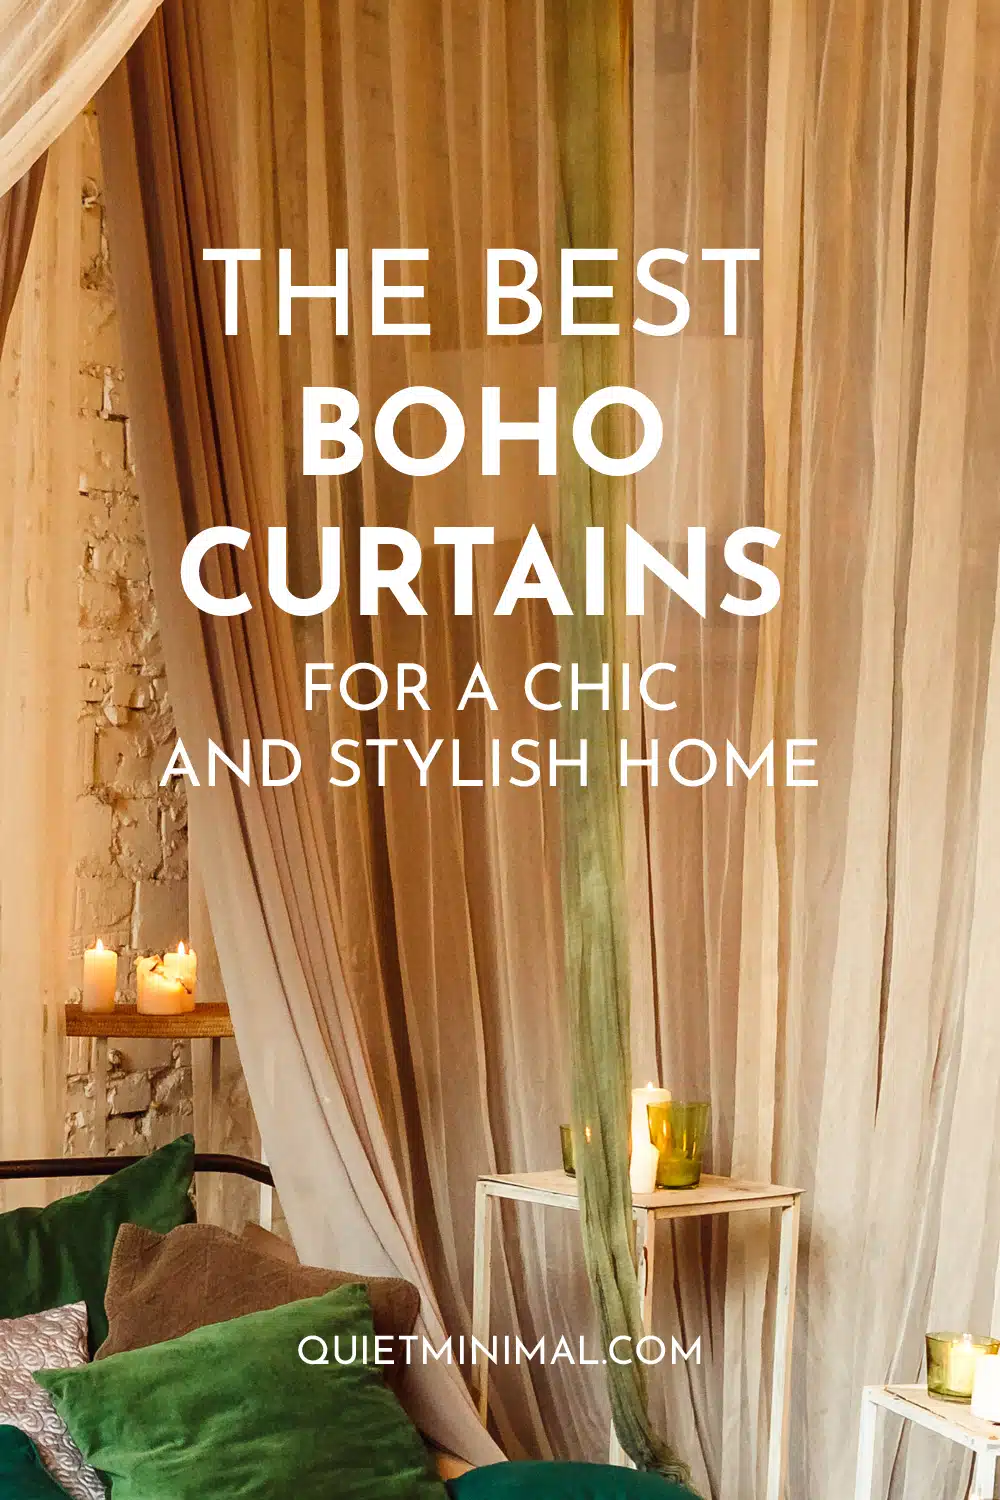 The Best Boho Curtains for a Chic and Stylish Home